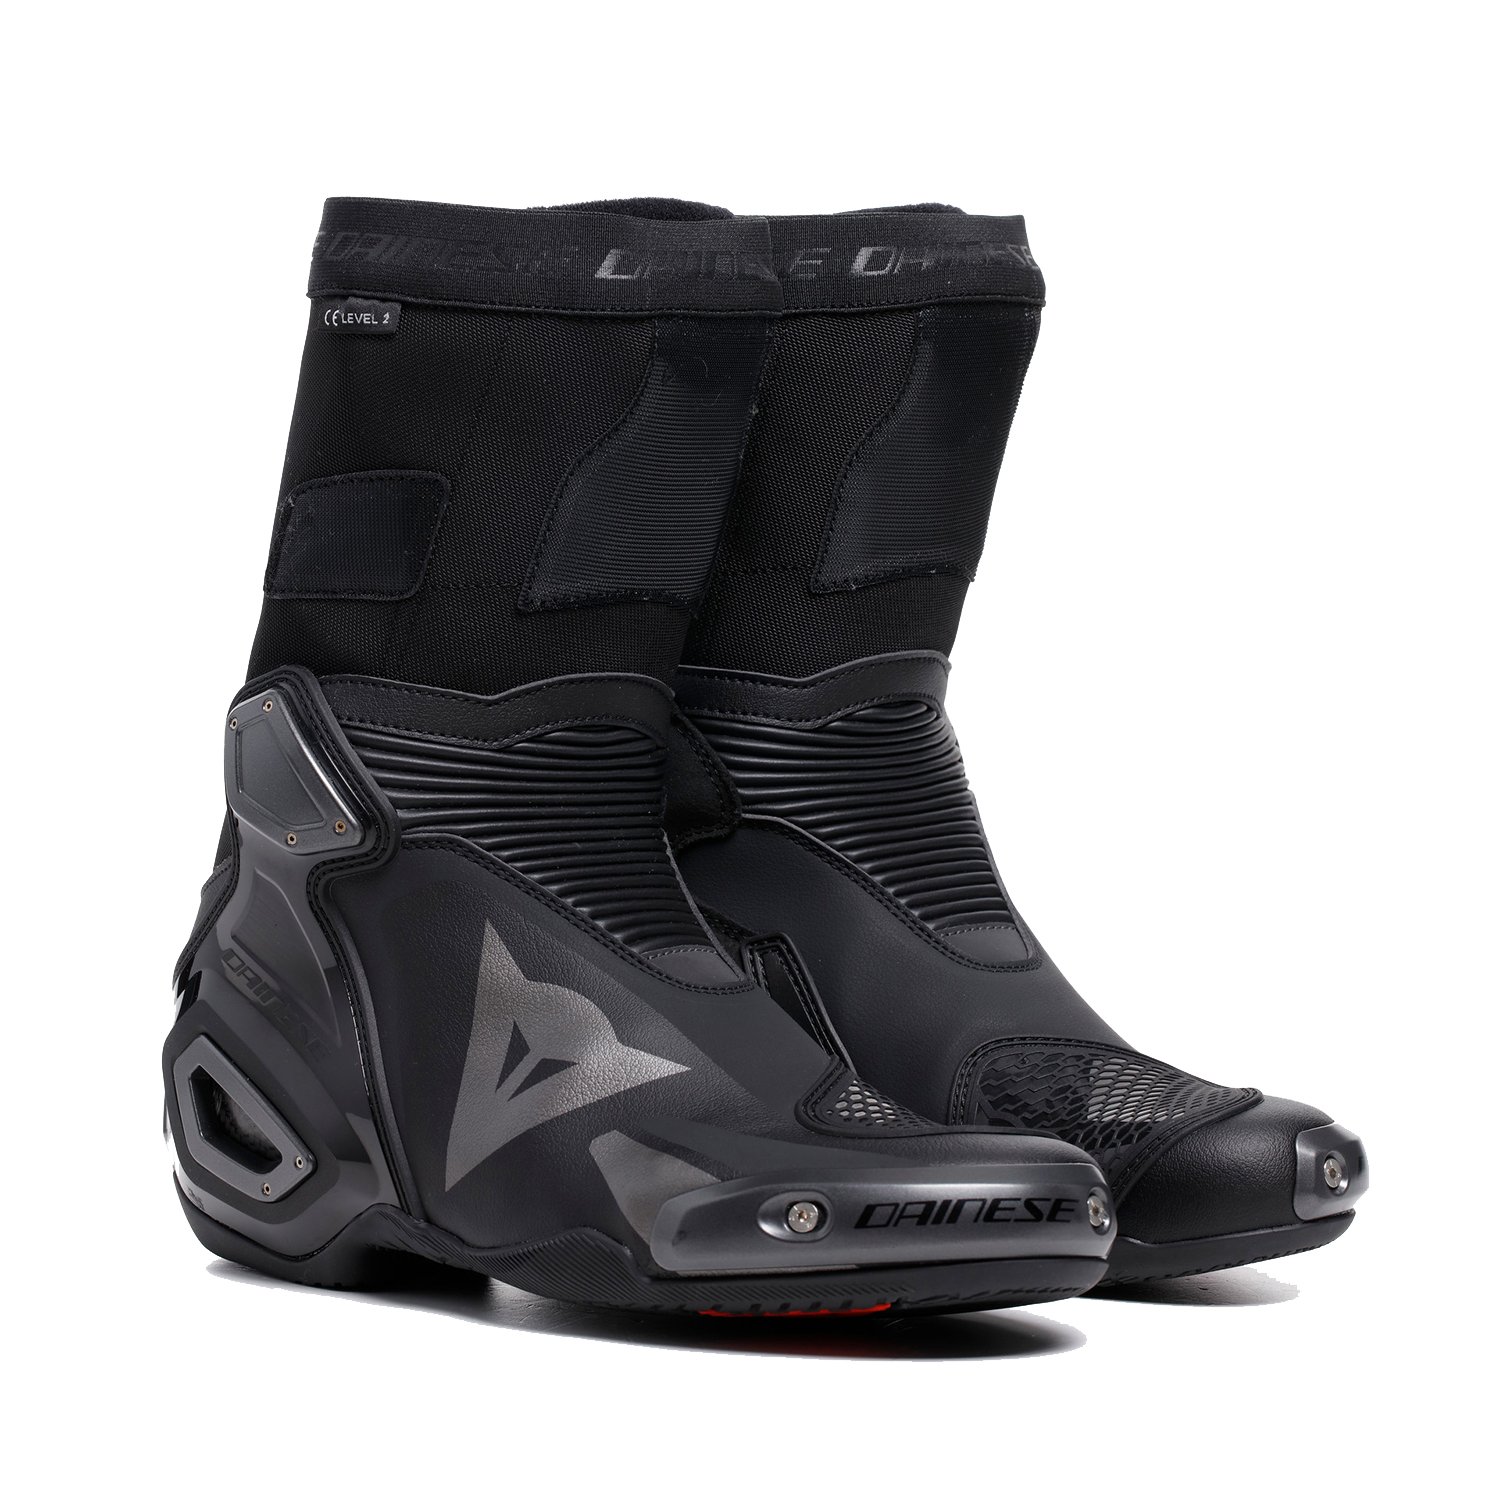 Image of Dainese Axial 2 Boots Black Black Größe 40